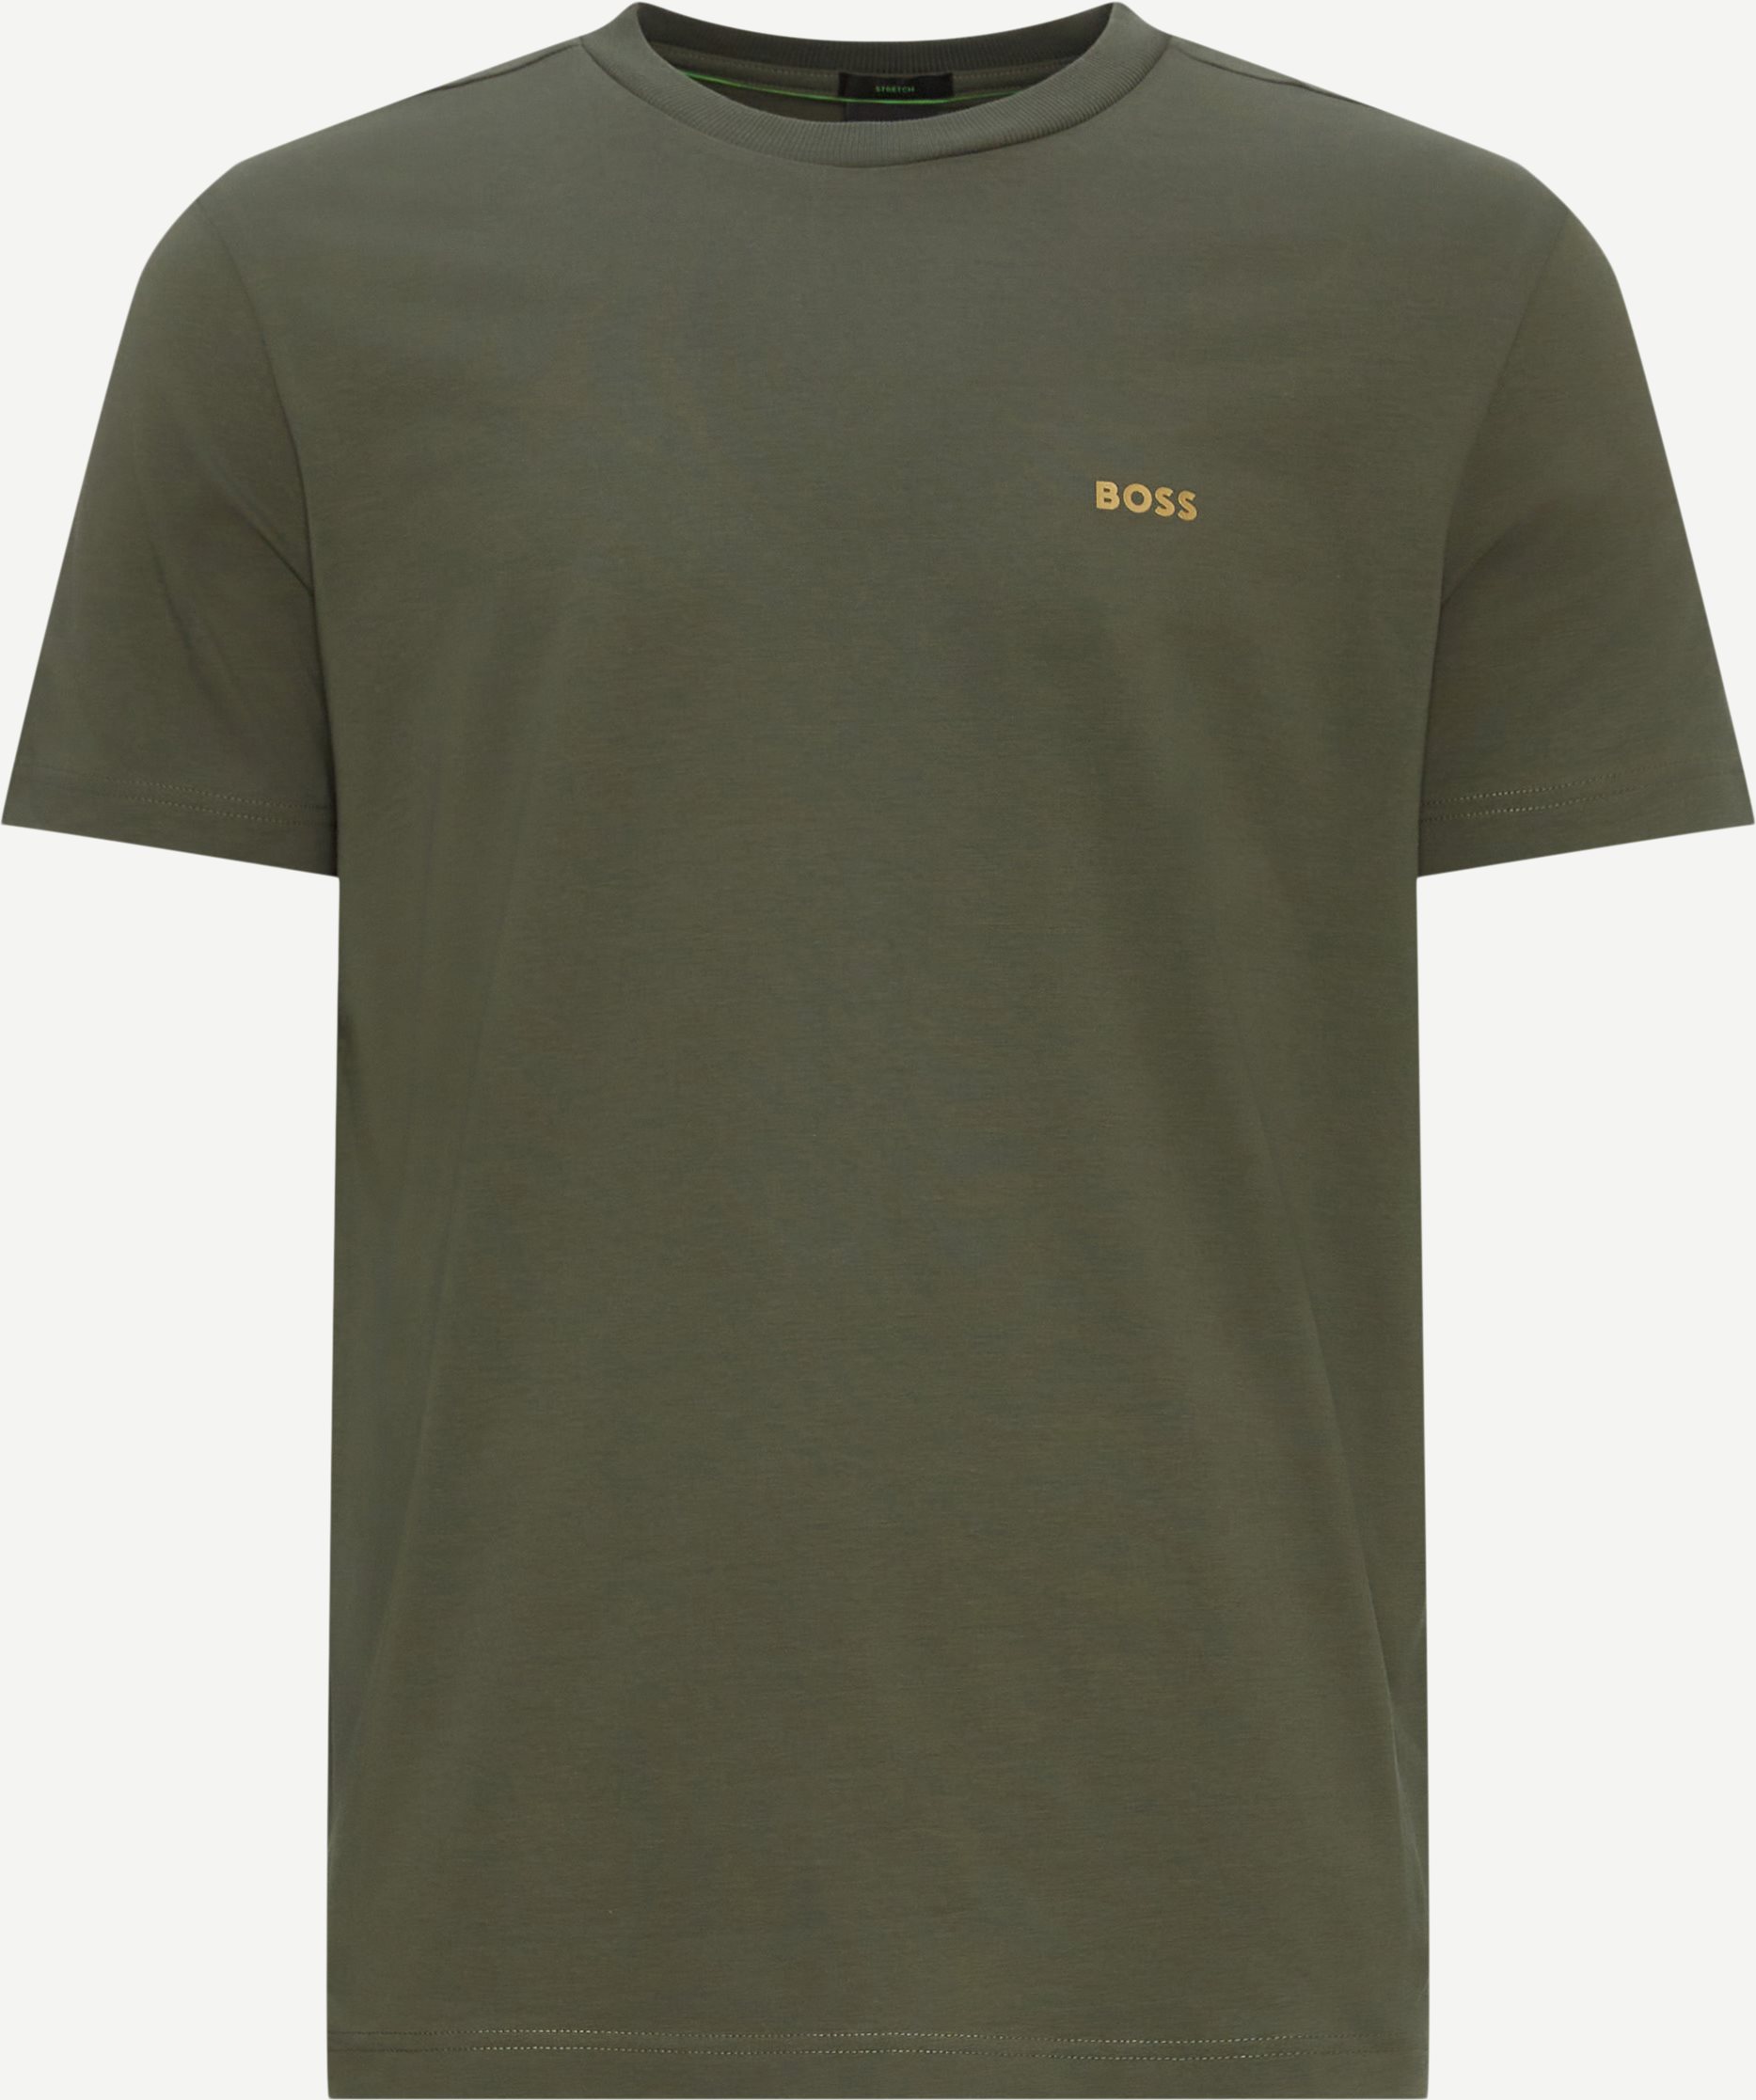 BOSS Athleisure T-shirts 50506373 TEE Army